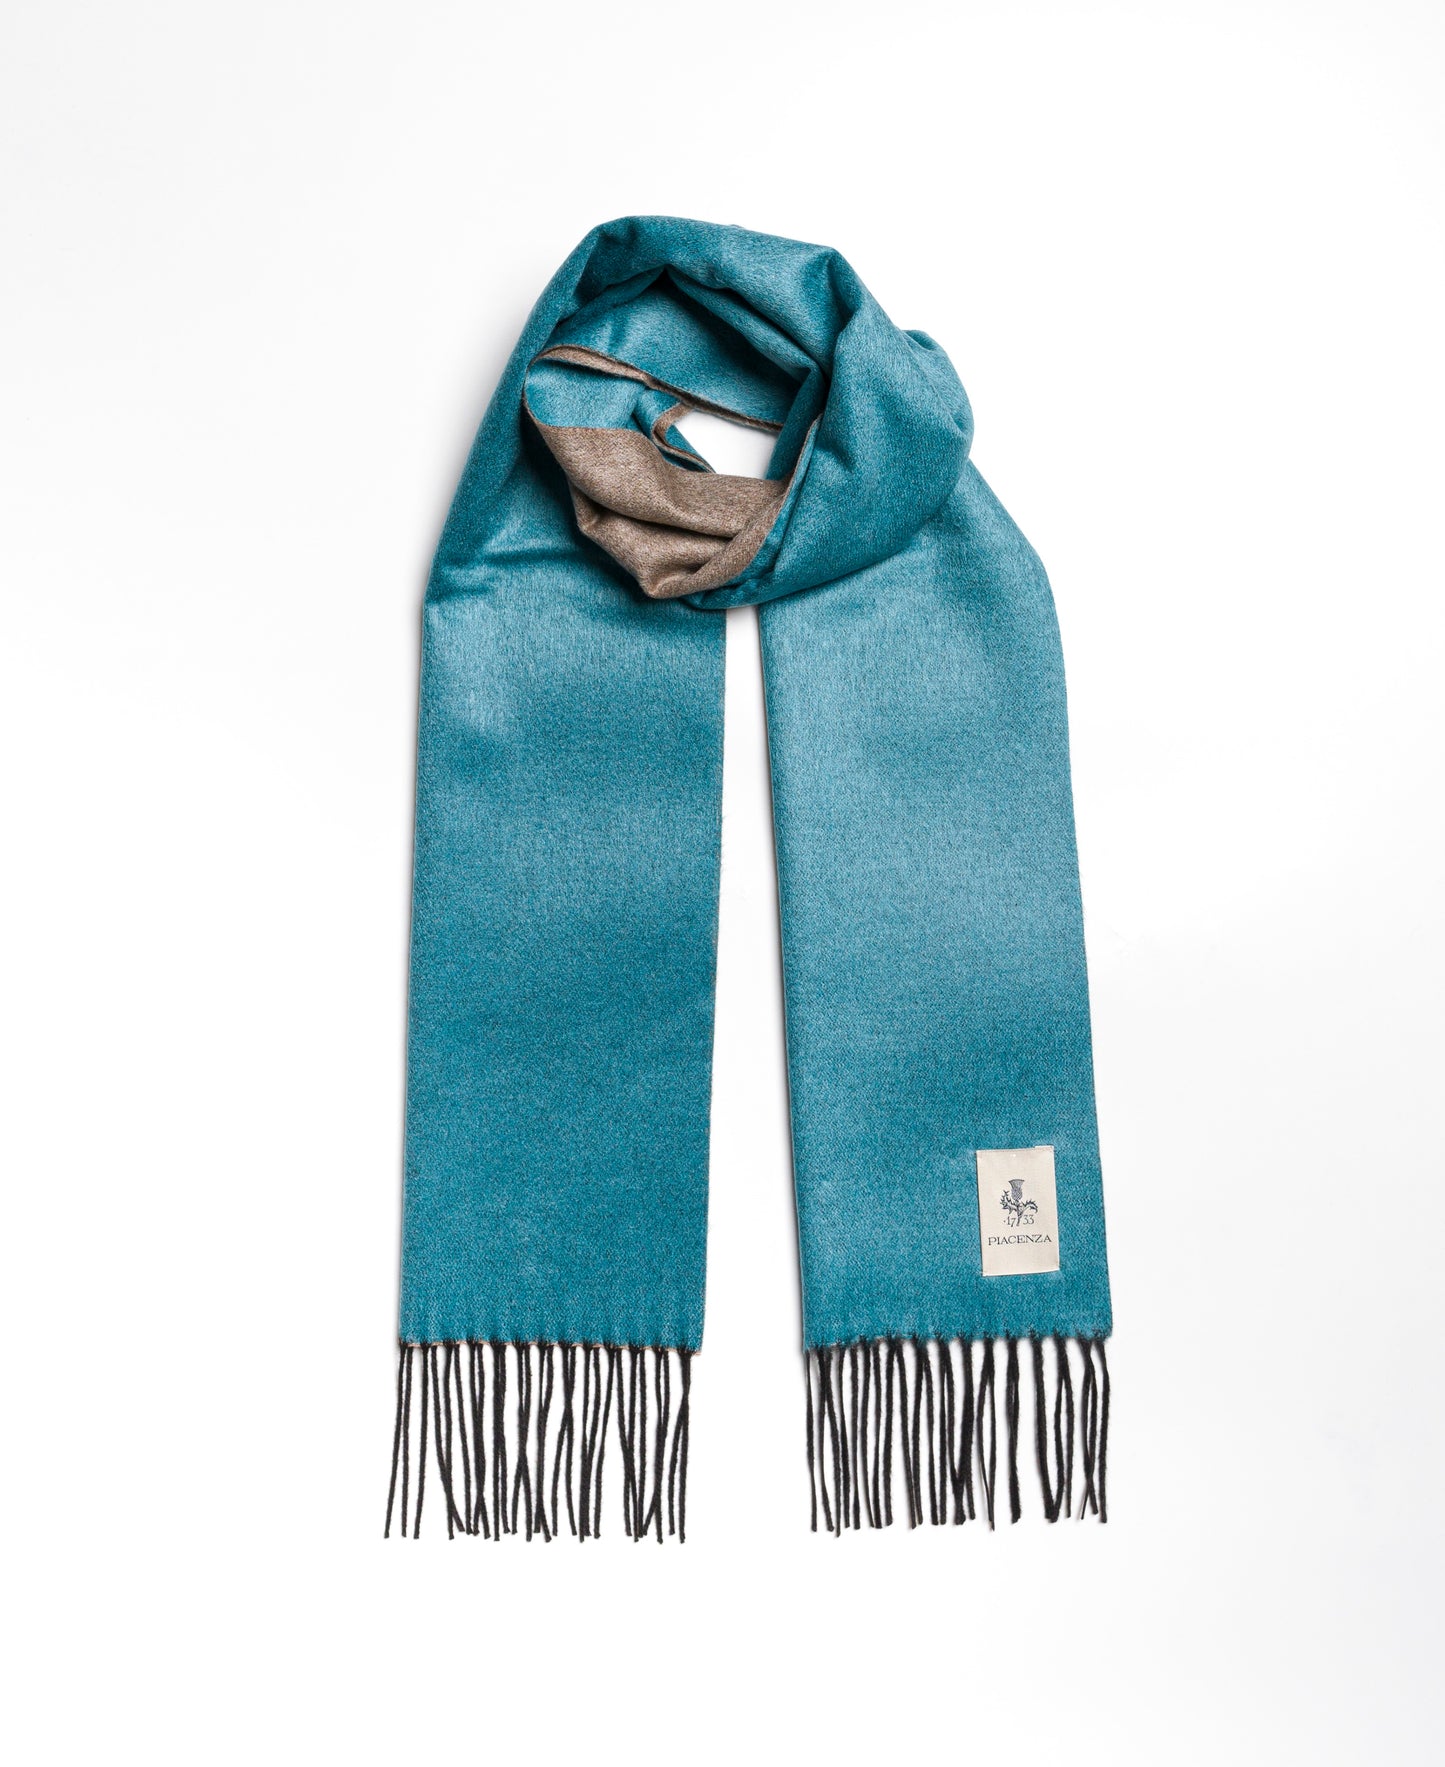 MIRROR - Two-tone Turquoise / Beige Cashmere / Silk Scarf